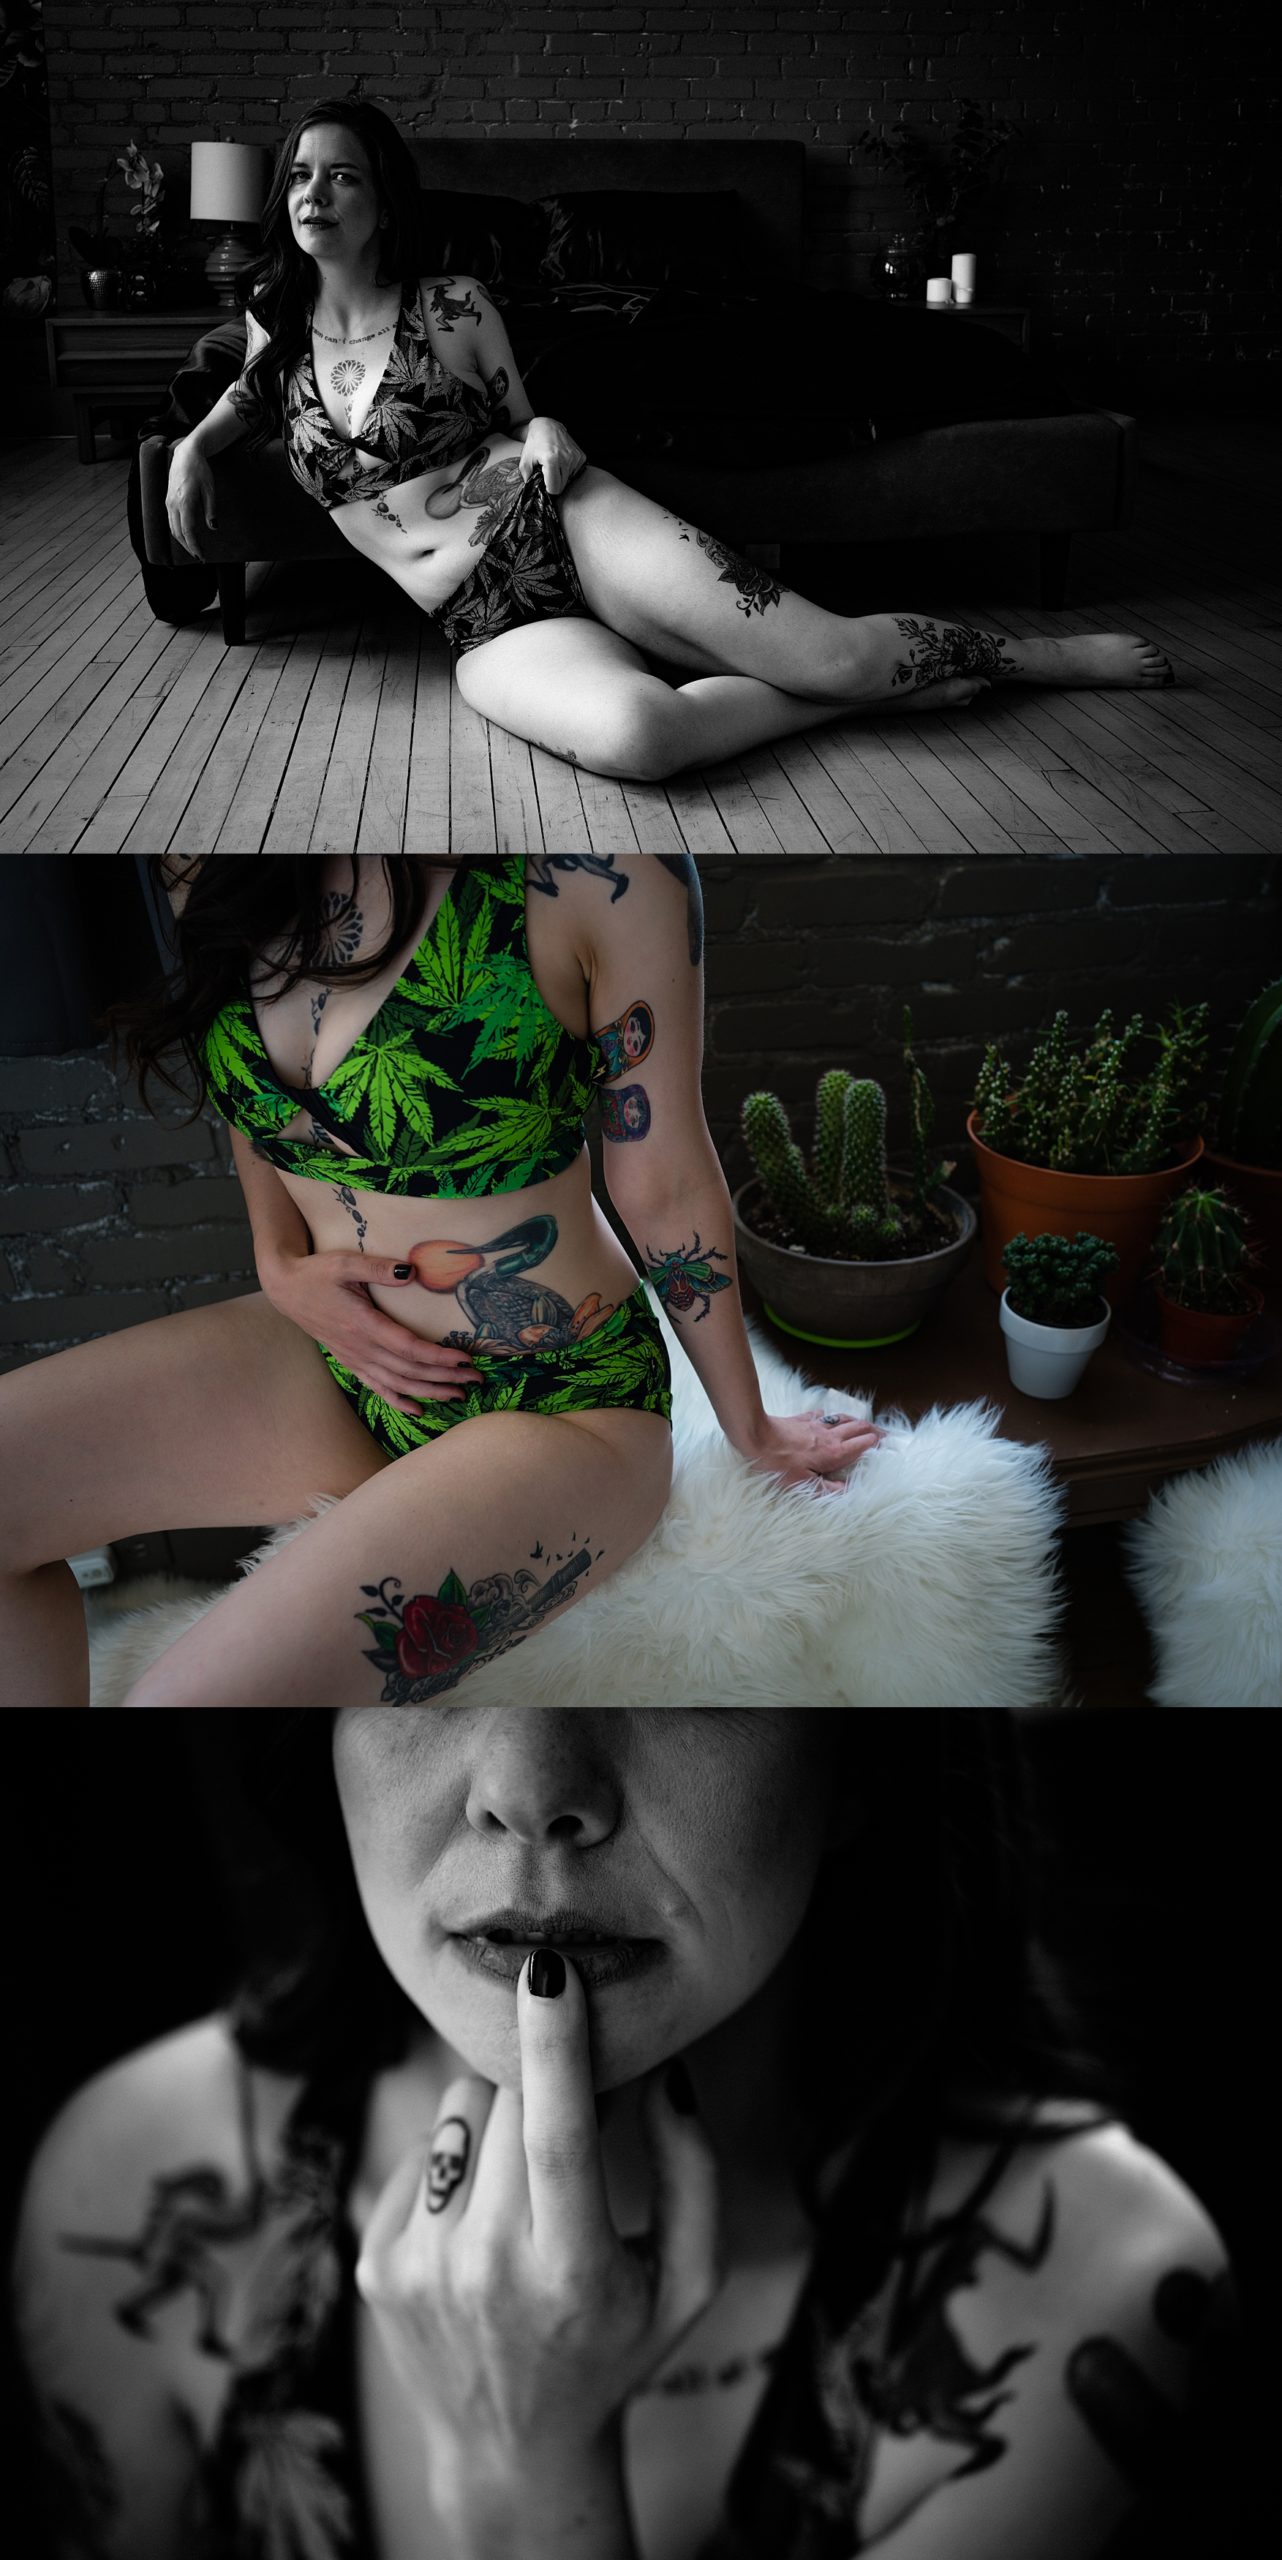 three images of a woman during a boudoir session, in one image she sits on the hardwood floor in front of a bed with black satin sheets, her legs are to the side. In the second image she is wearing a cannabis leaf two piece lingerie set, you cannot see her face, and she has one hand covering her tattooed belly. The last image is black and white and is a close-up of the woman's mouth, she is touching one finger to her lip